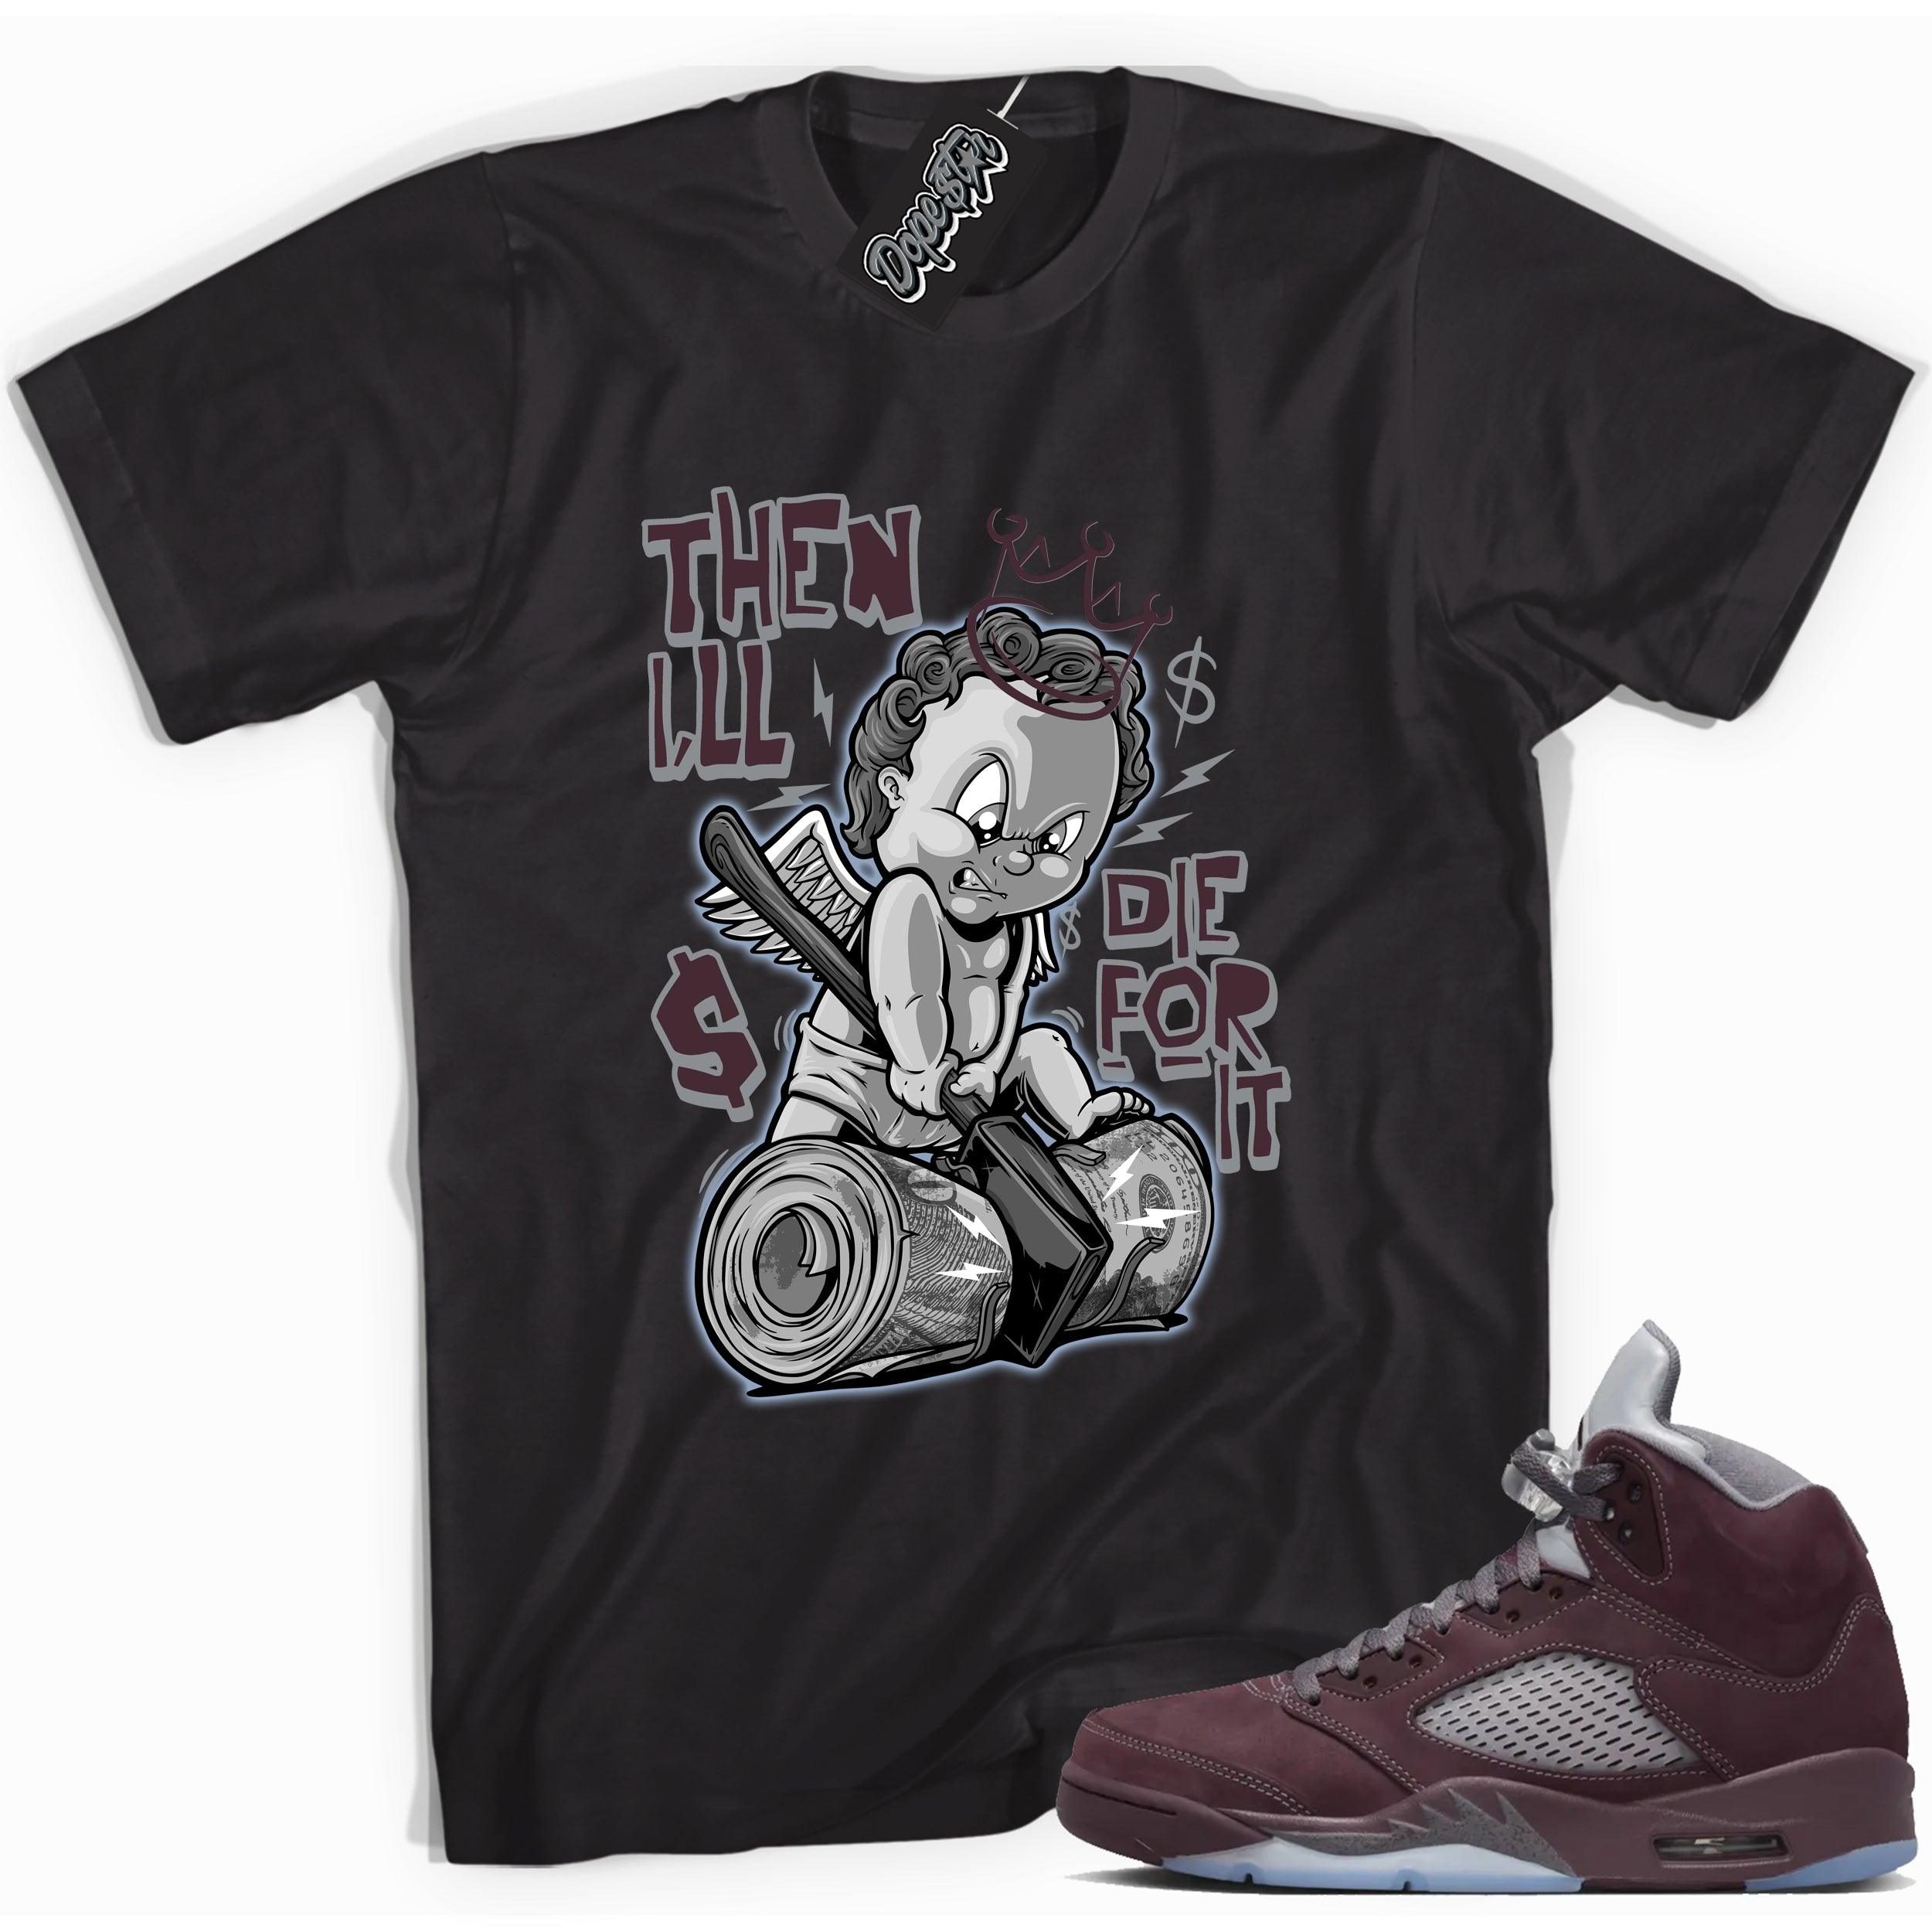 Cool Black graphic tee with “ Then I’ll 2 ” print, that perfectly matches Air Jordan 5 Burgundy 2023 sneakers